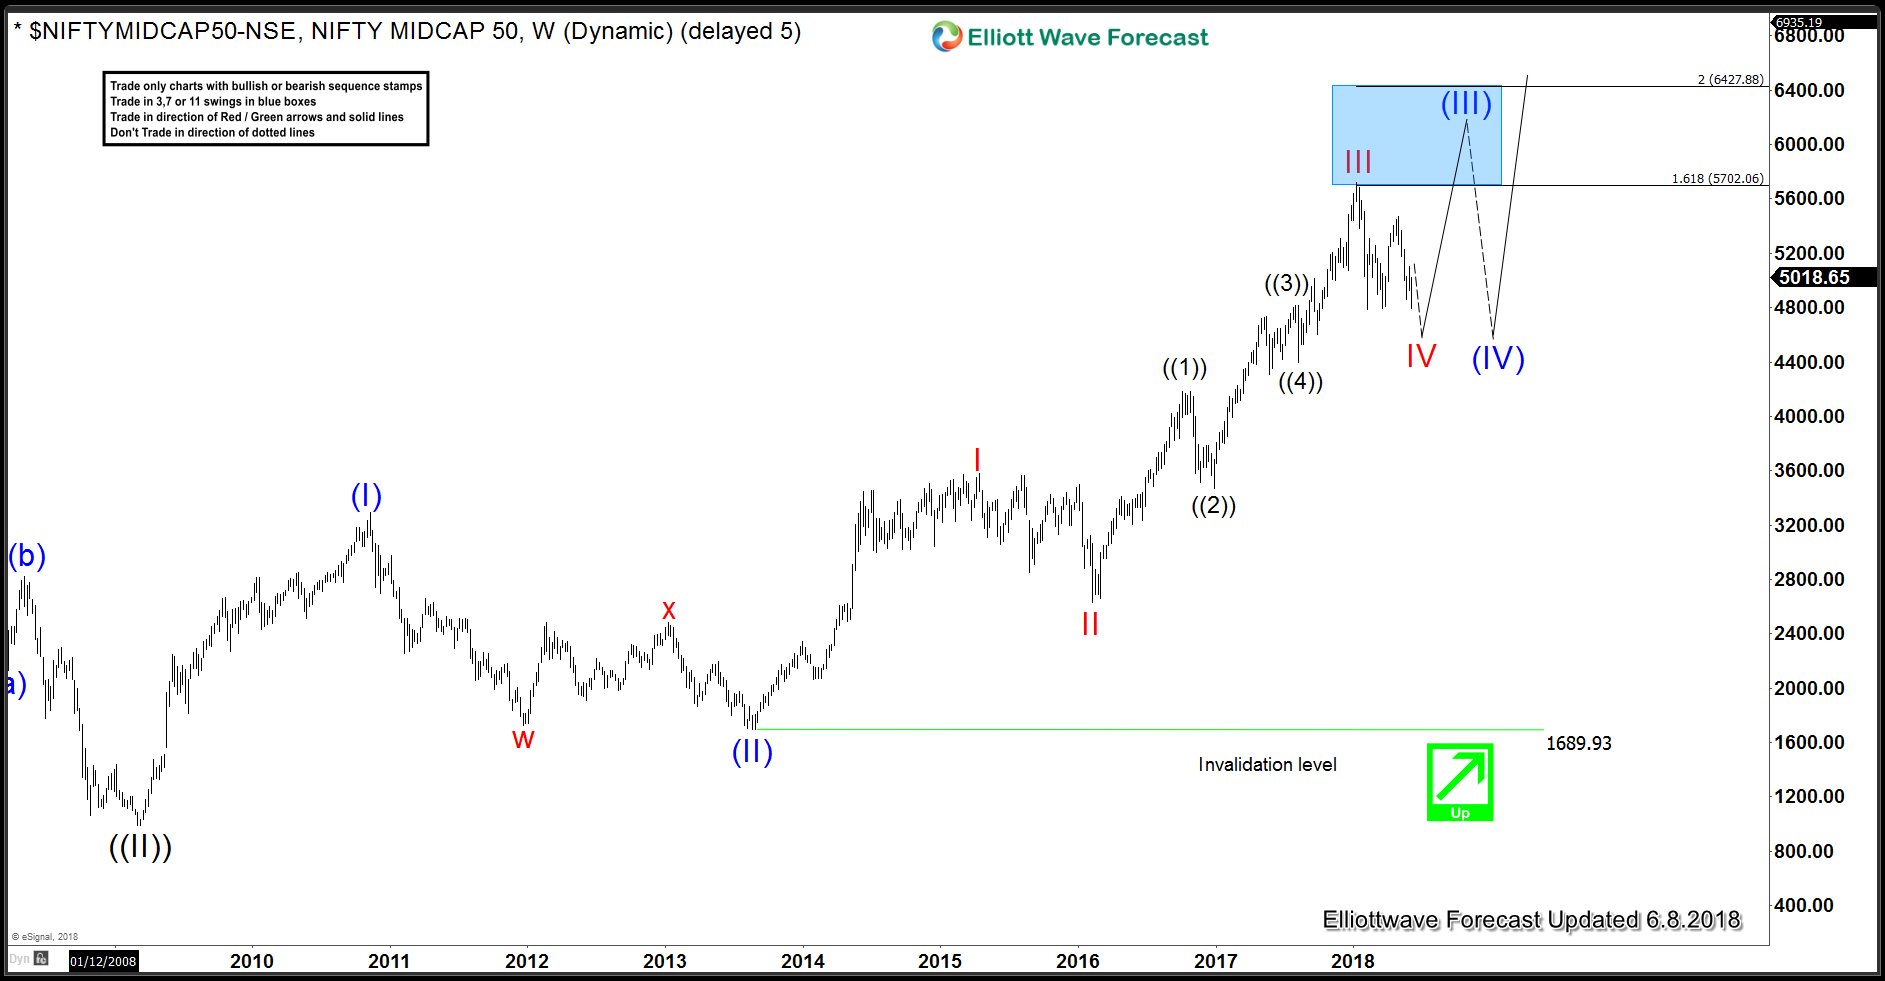 NIFTY MIDCAP Index Elliott Wave Analysis: Buying Opportunity Soon